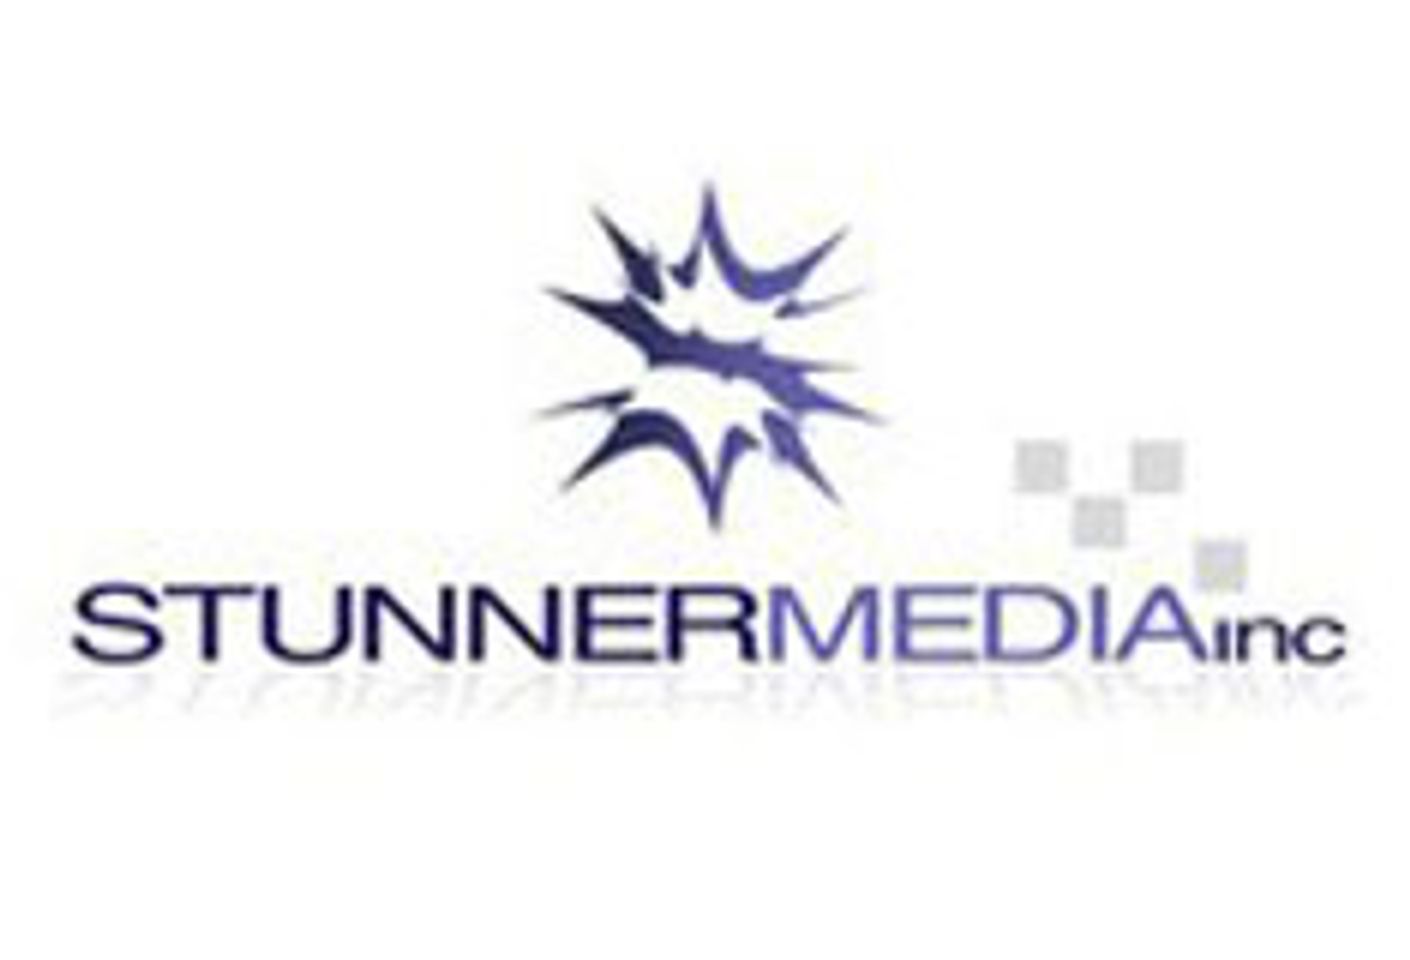 Stunner Media to Donate Portion of Sales to Fondation Émergence